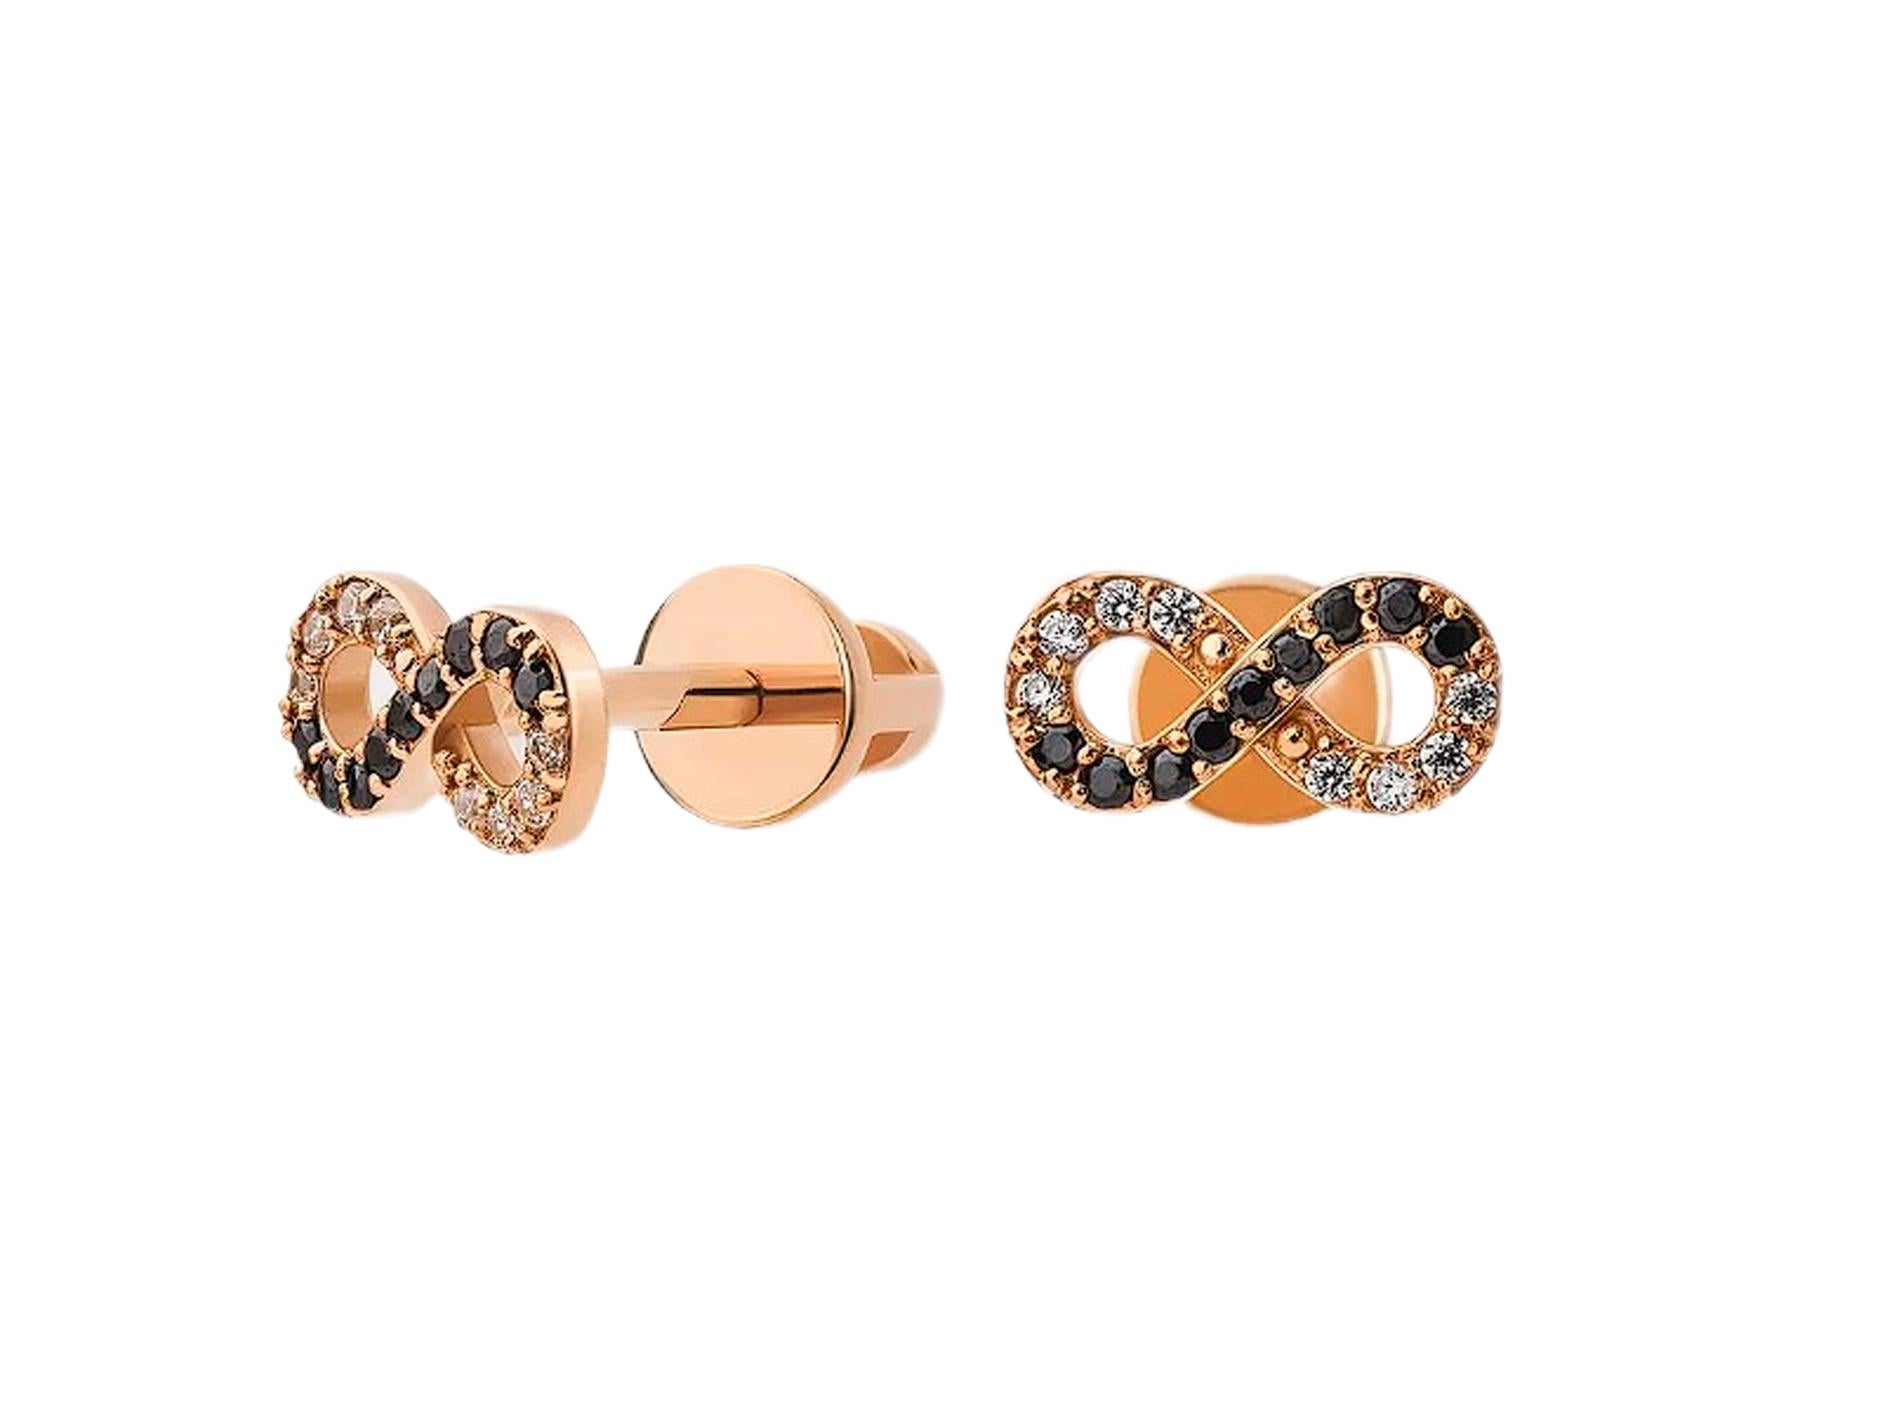 Round Cut Infinity earrings studs in 14k gold. For Sale